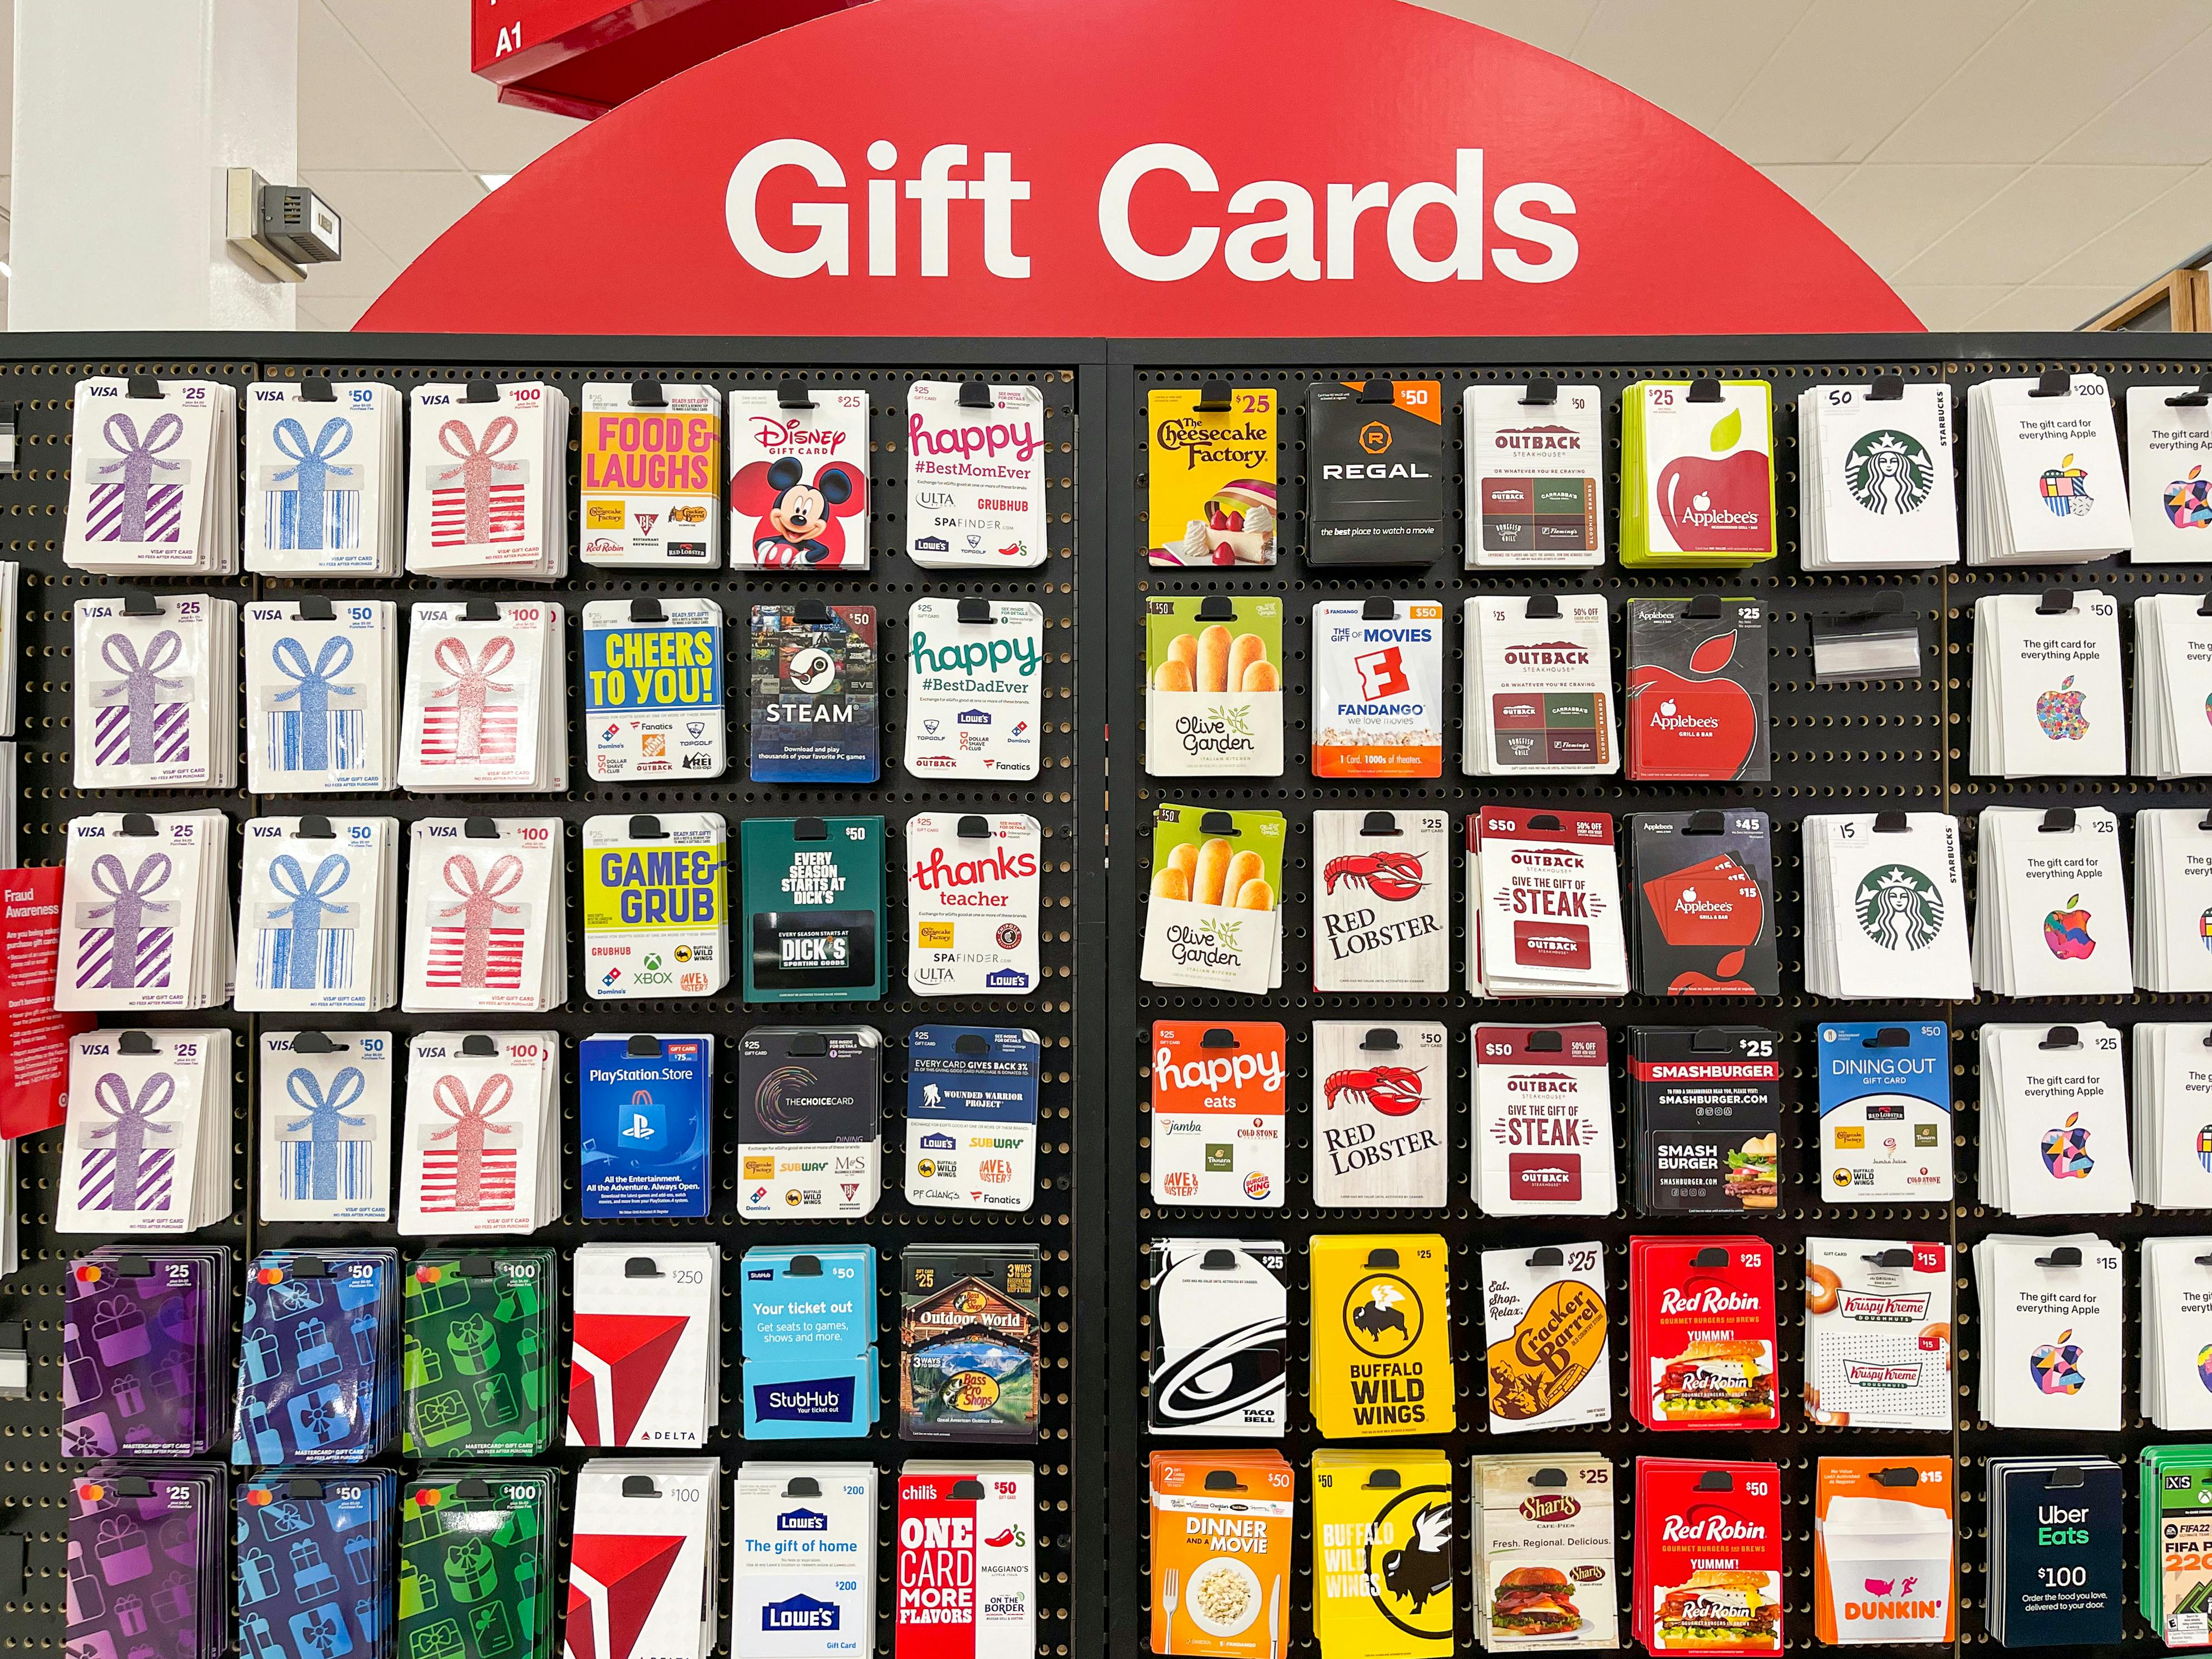 Does Office Depot Sell Amazon Gift Cards?